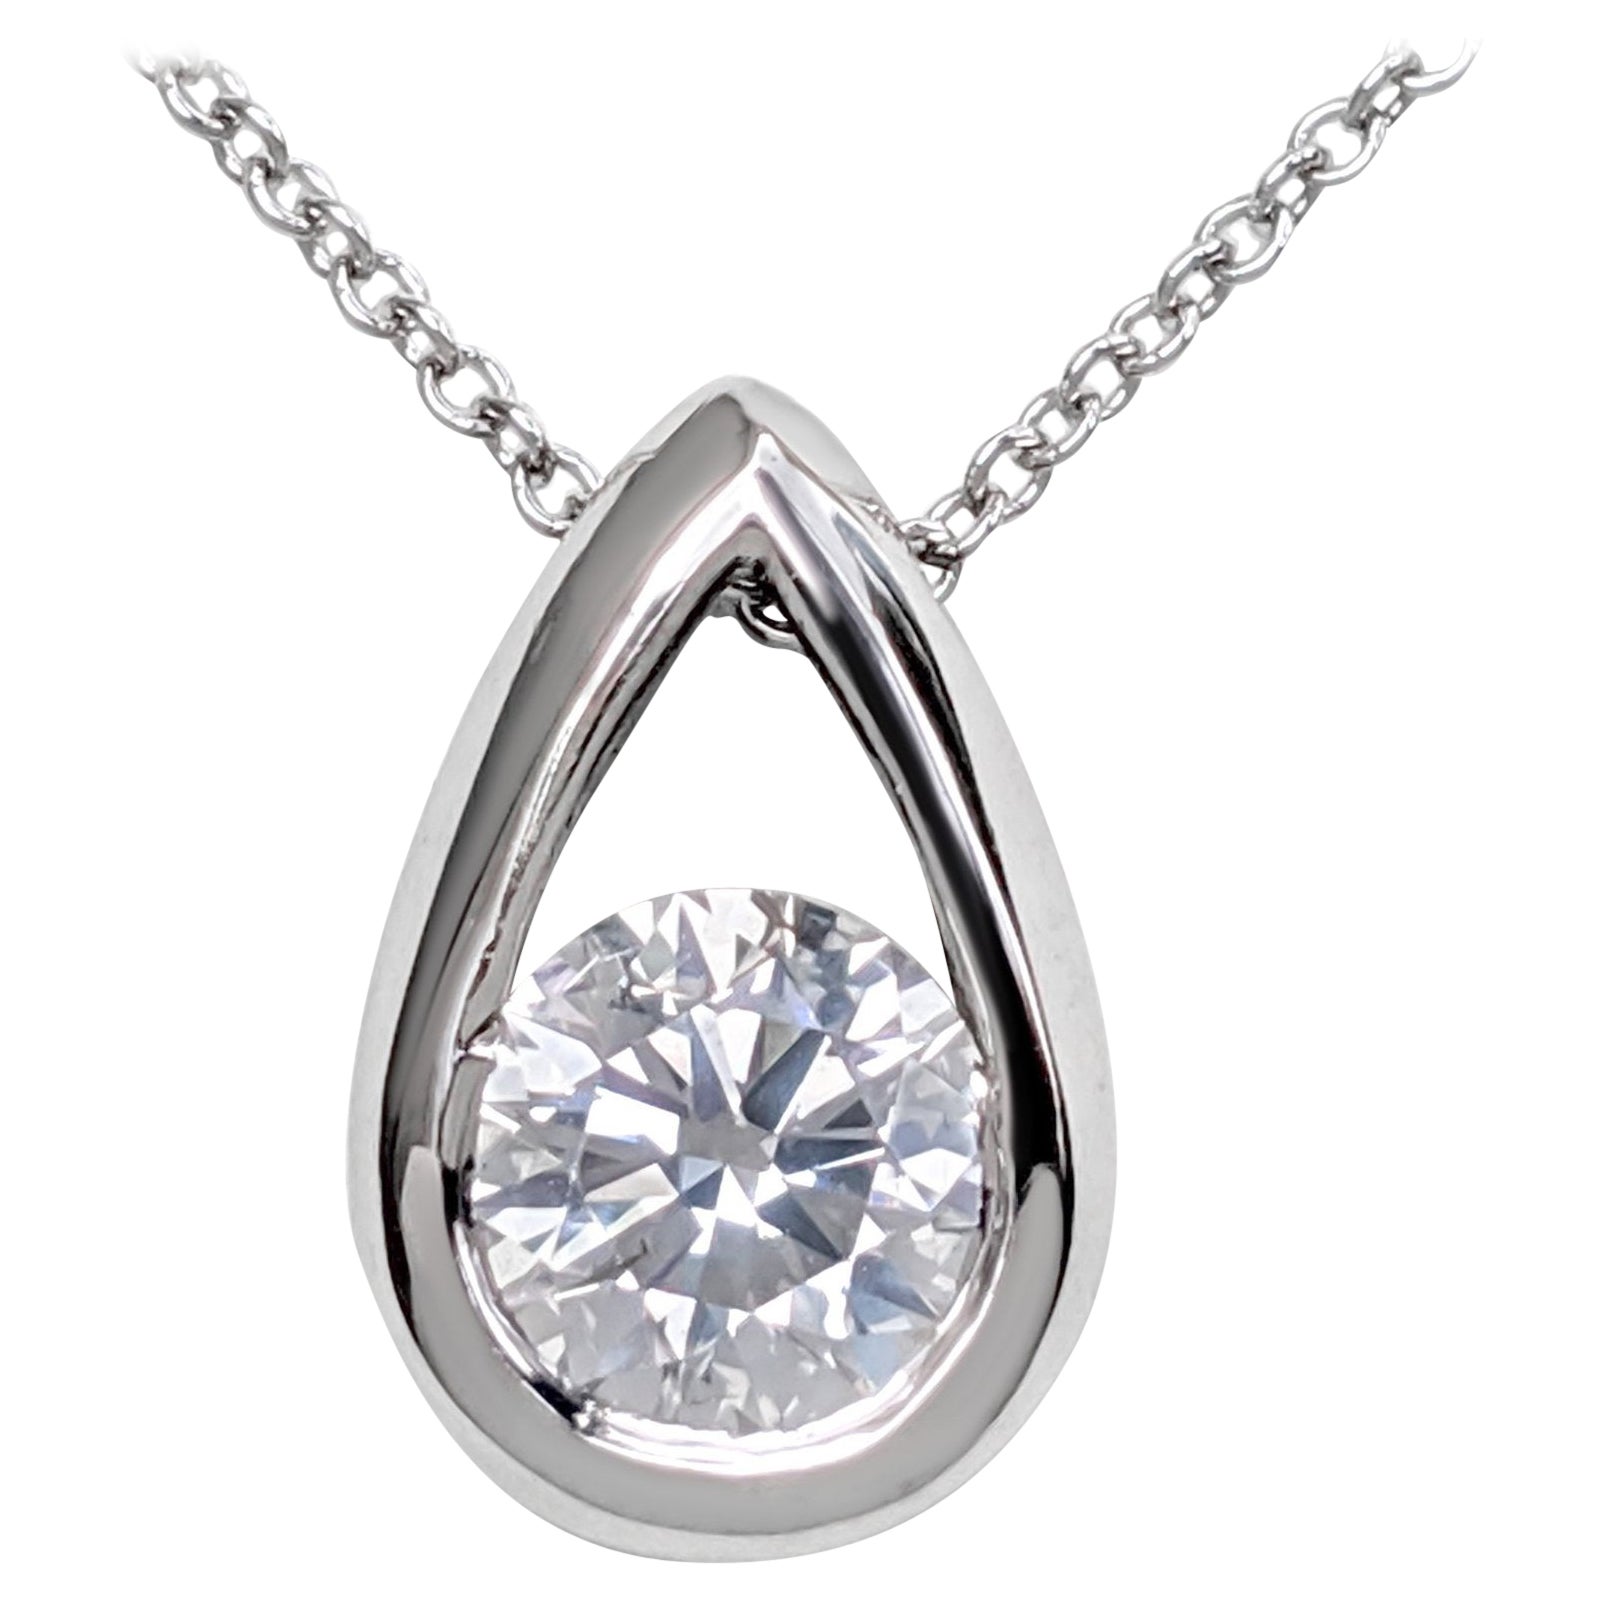 NO RESERVE! 0.50 Carat Diamond - 14 kt. White gold - Necklace with pendant For Sale